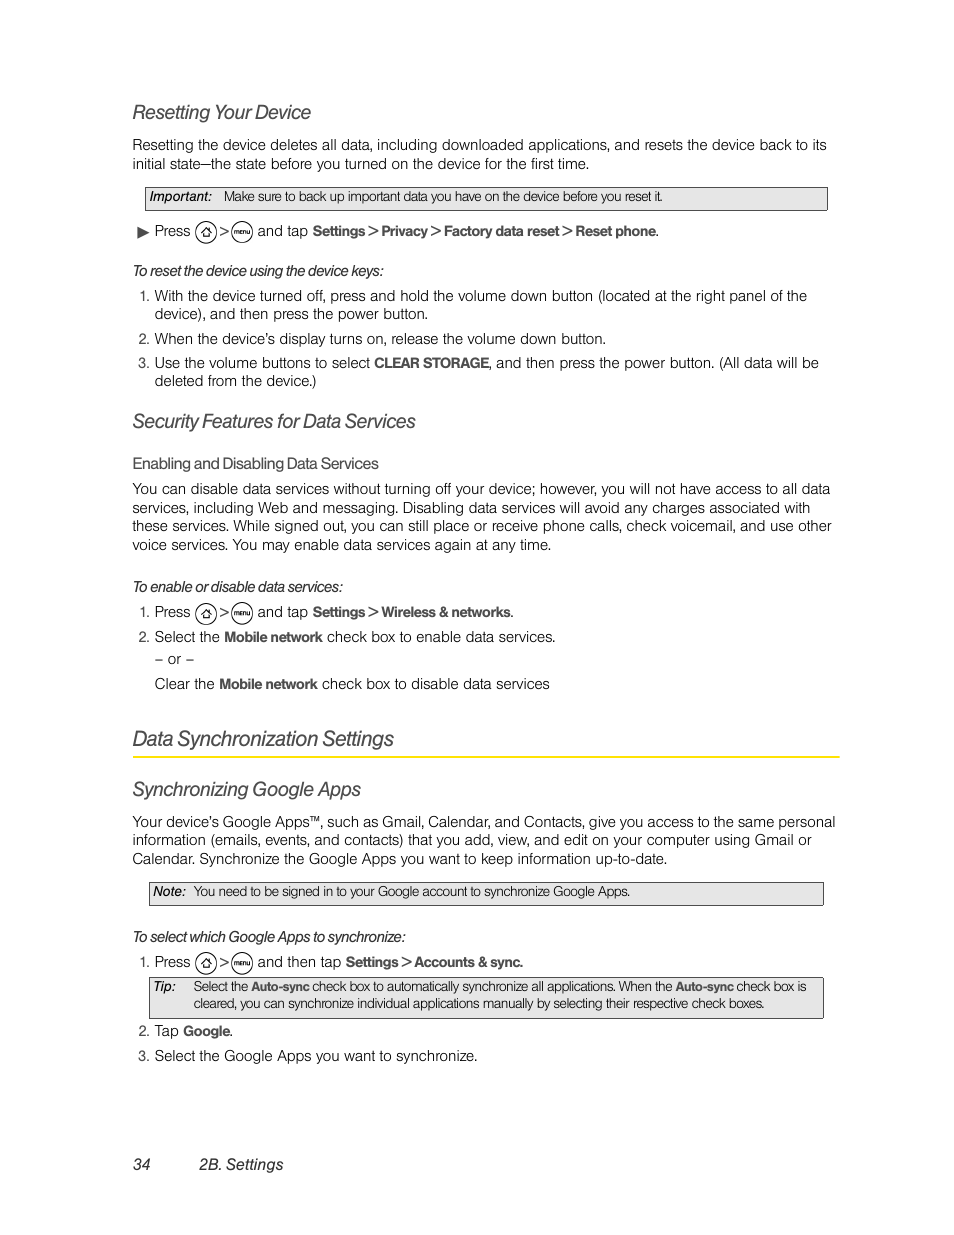 Resetting your device, Security features for data services, Data synchronization settings | Synchronizing google apps | HTC EVO 4G User Manual | Page 44 / 197